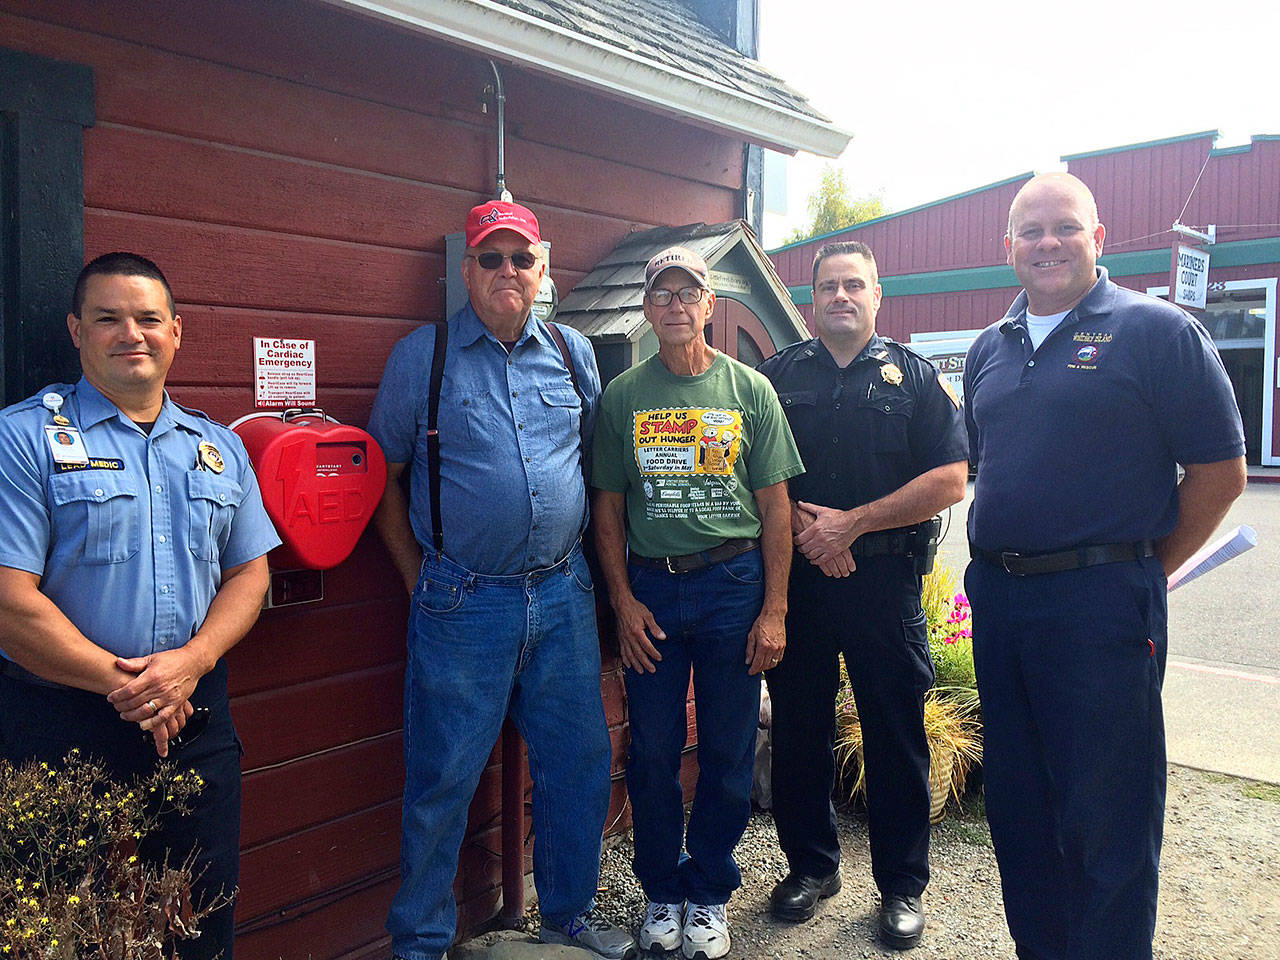 From left, lead paramedic Chris Tumblin with WhidbeyHealth-EMS, Mike Dessert and Dale Folkestad of Coupeville Festival Association, Deputy Marshal Leif Haugen of the Coupeville Marshal’s Office and Deputy Chief Charlie Smith of Central Whidbey Island Fire and Rescue stand by one of three AEDs installed around town. Photo provided